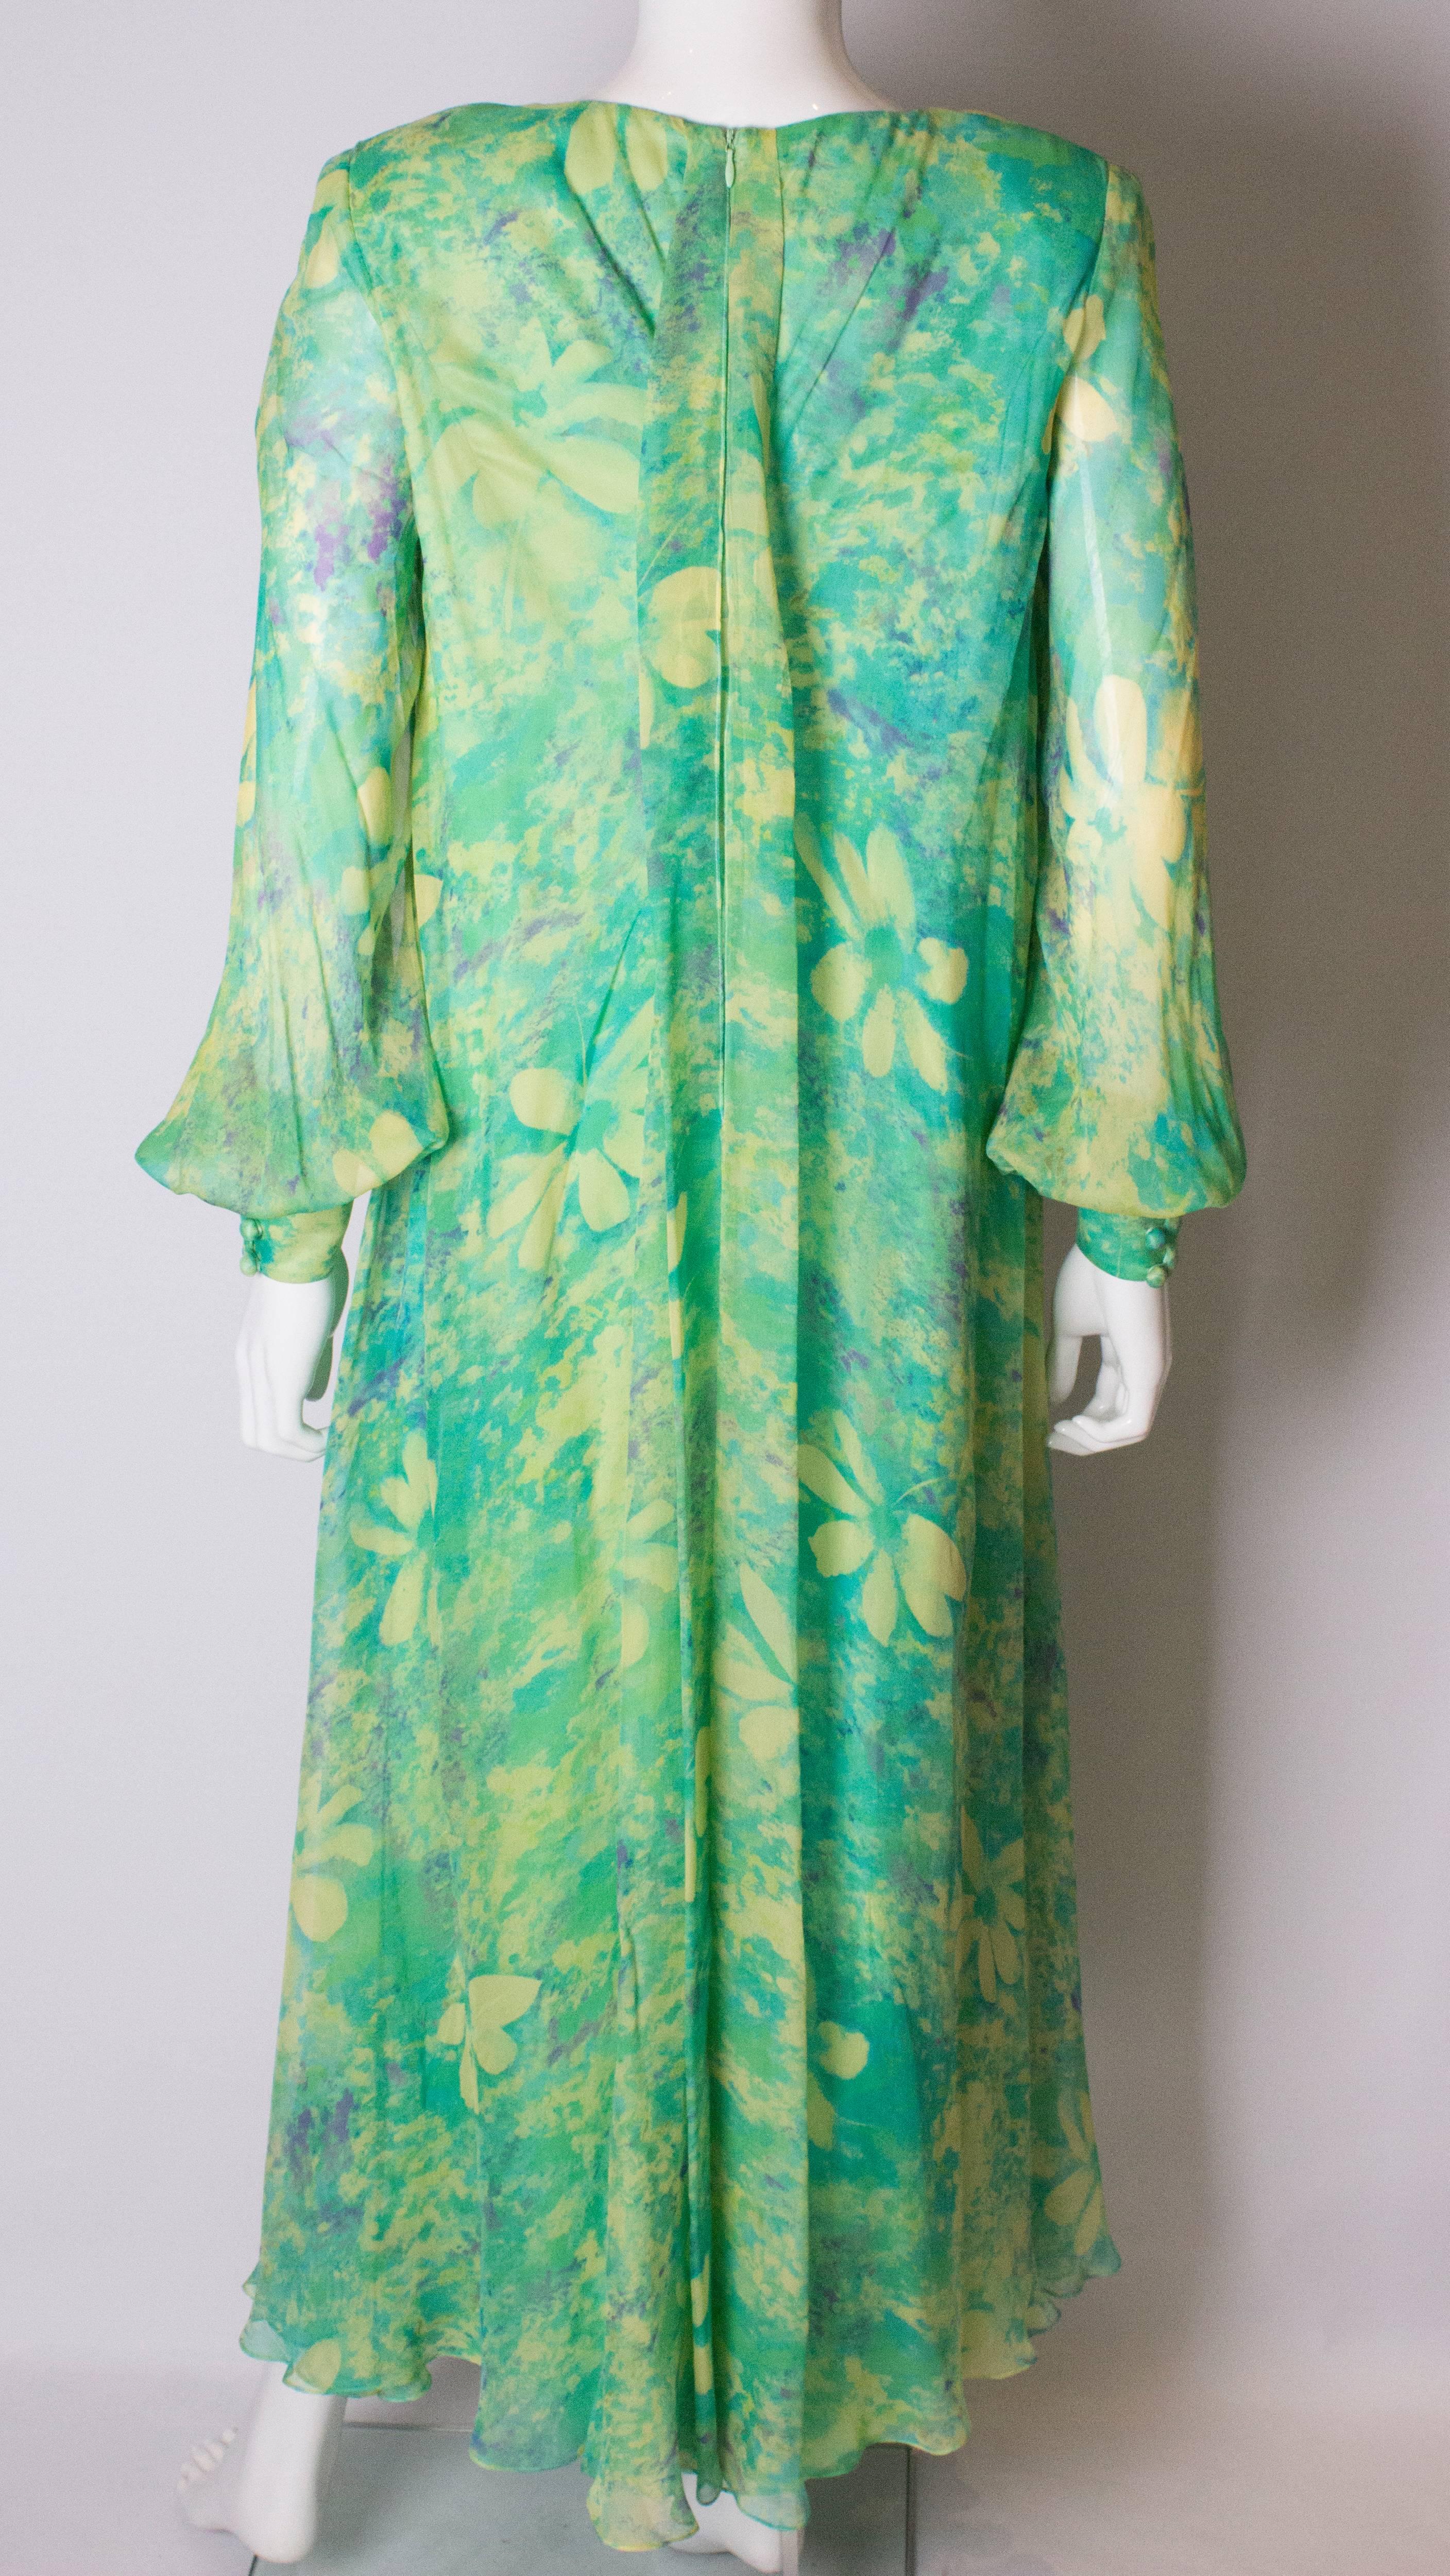 Women's or Men's A vintage 1970s green floral print silk dress by Alison Rodger